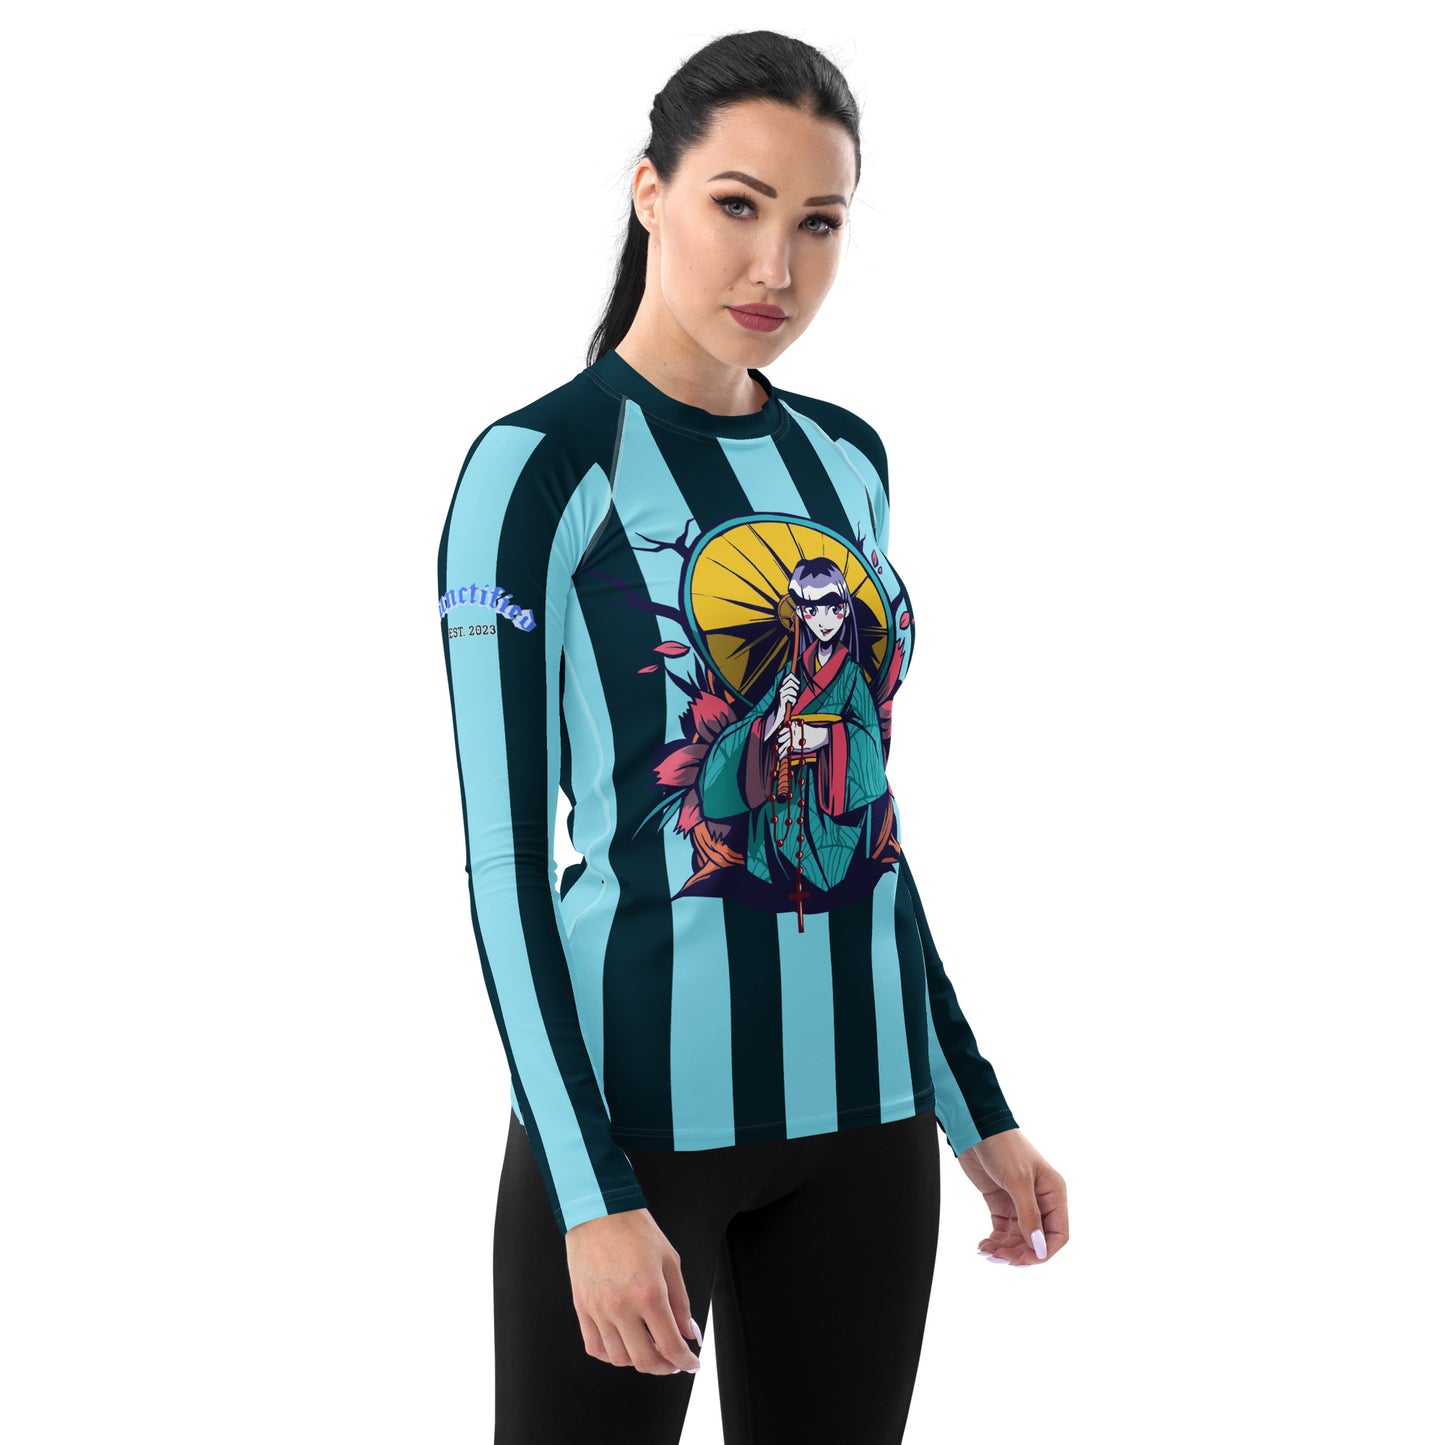 GOODNESS OF THE LORD- Women's Rash Guard